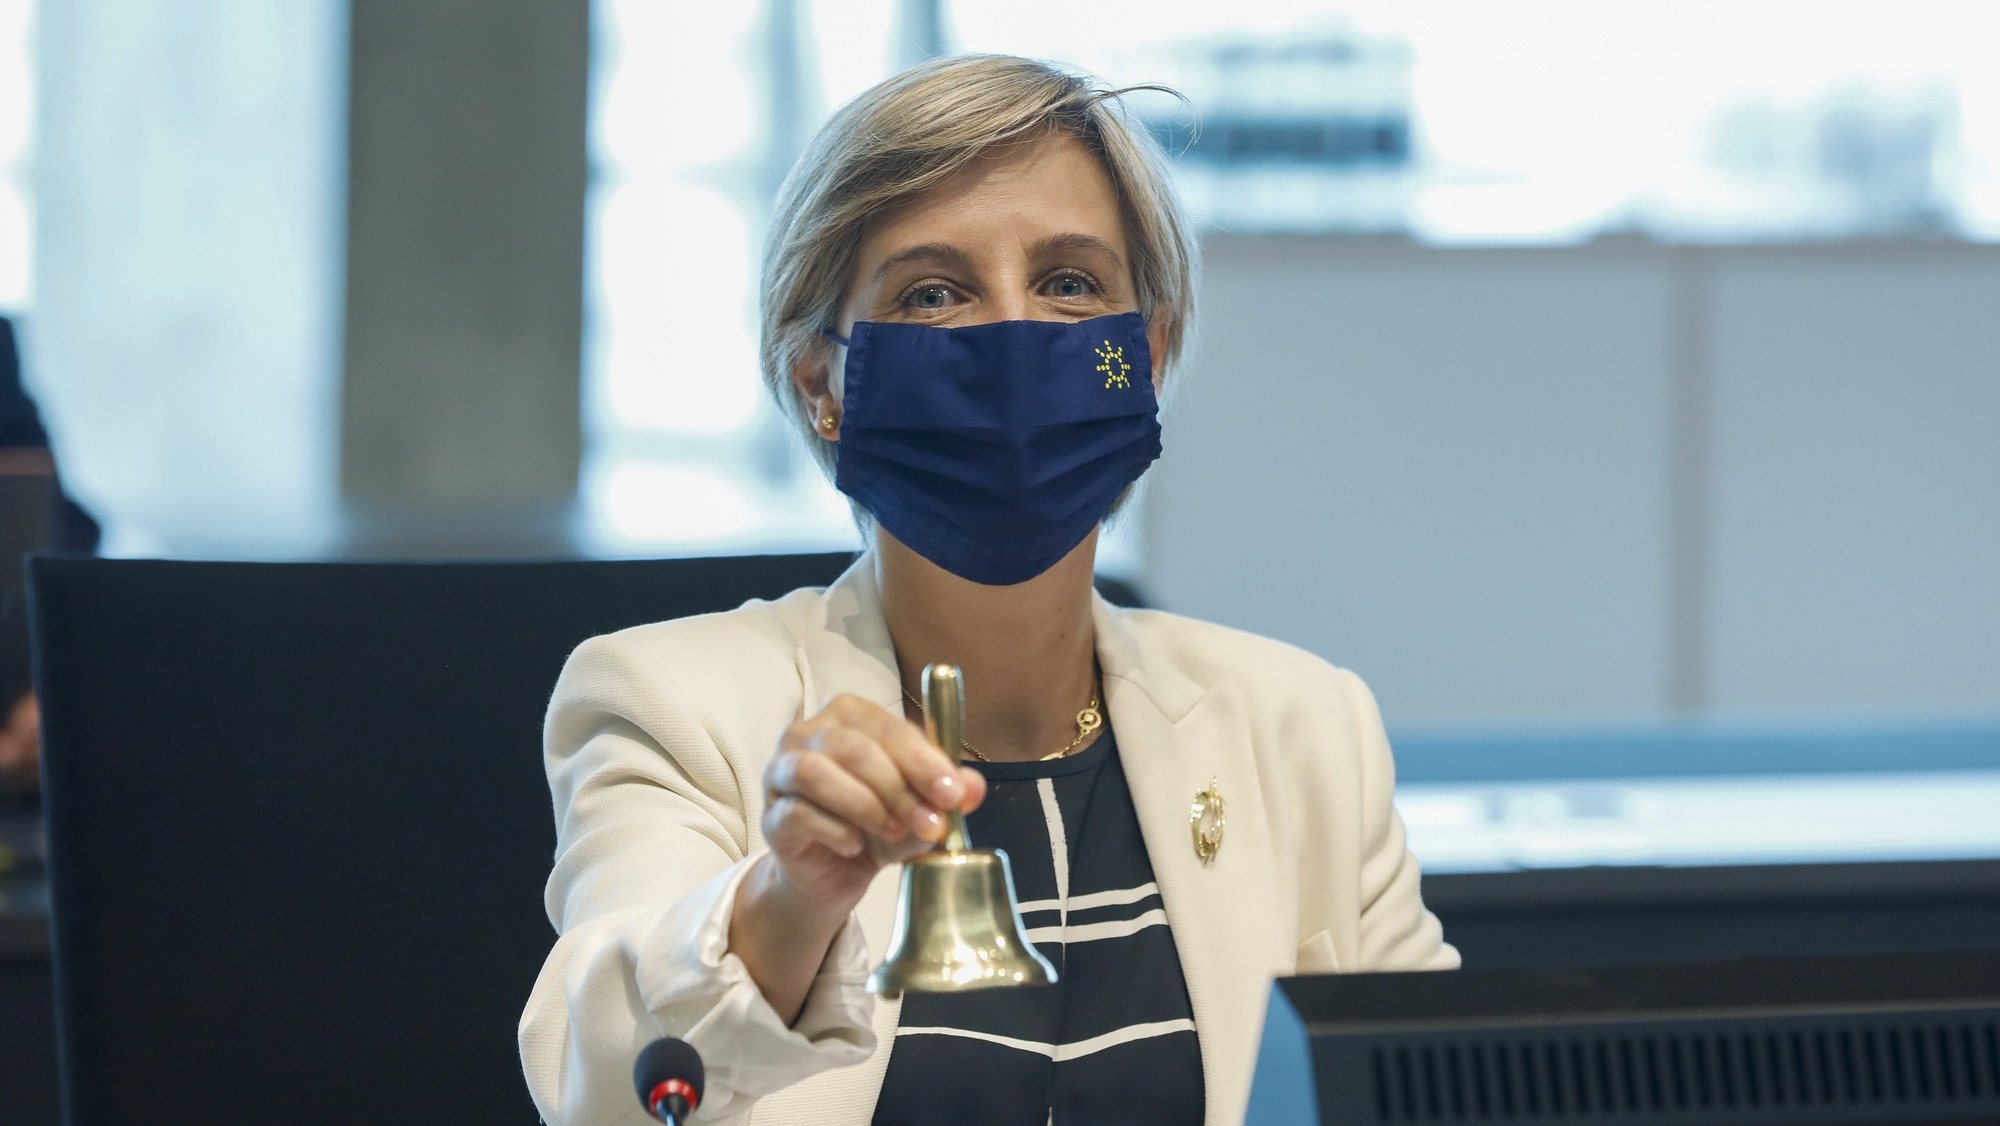 epa09272342 Portuguese Minister for Health Marta Temido rings a bell at the start of the Health Council meeting in Luxembourg, 15 June 2021. Ministers will aim to adopt a Council position on rules to reinforce the role of the European Medicines Agency in crisis preparedness and management for medicinal products and medical devices.  EPA/JULIEN WARNAND